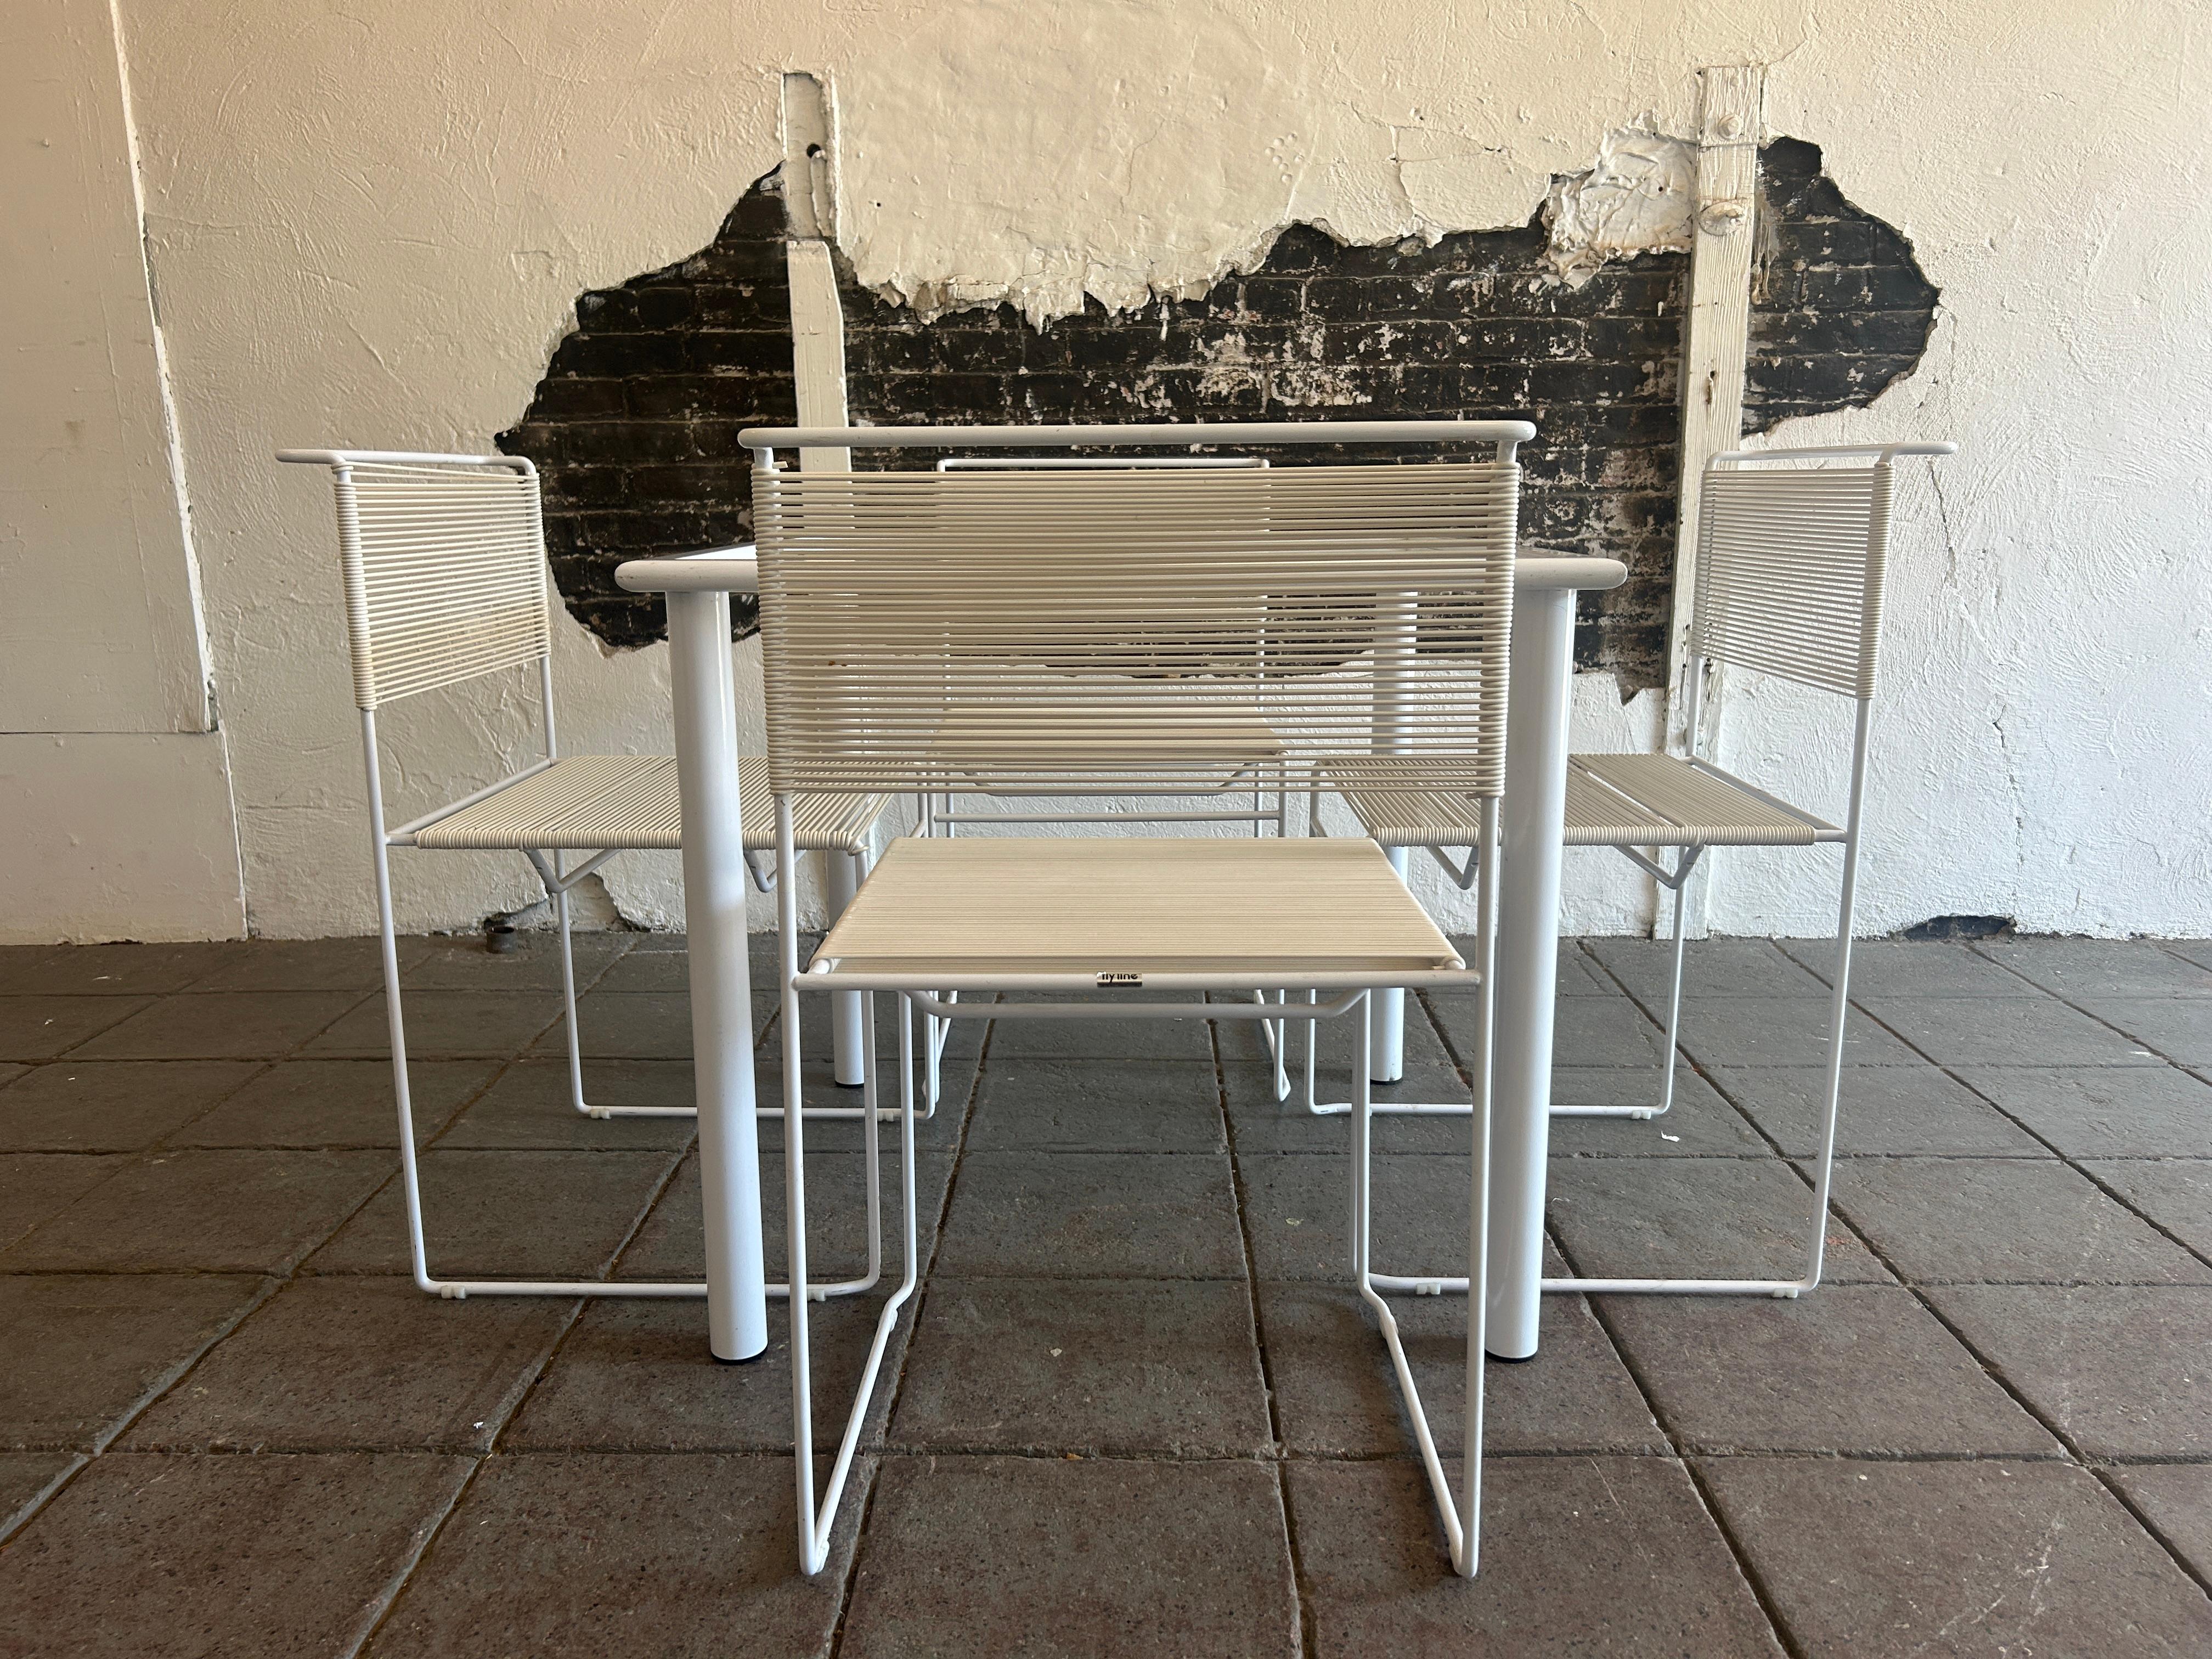 Magnificent 1970s original Spaghetti chairs and matching square table with grid glass set in all white by Giandomenico Belotti. Manufacturer is Fly Line by CMP Padova. Made in Italy. Rare full set in white lacquered steel. Gorgeous Minimalist